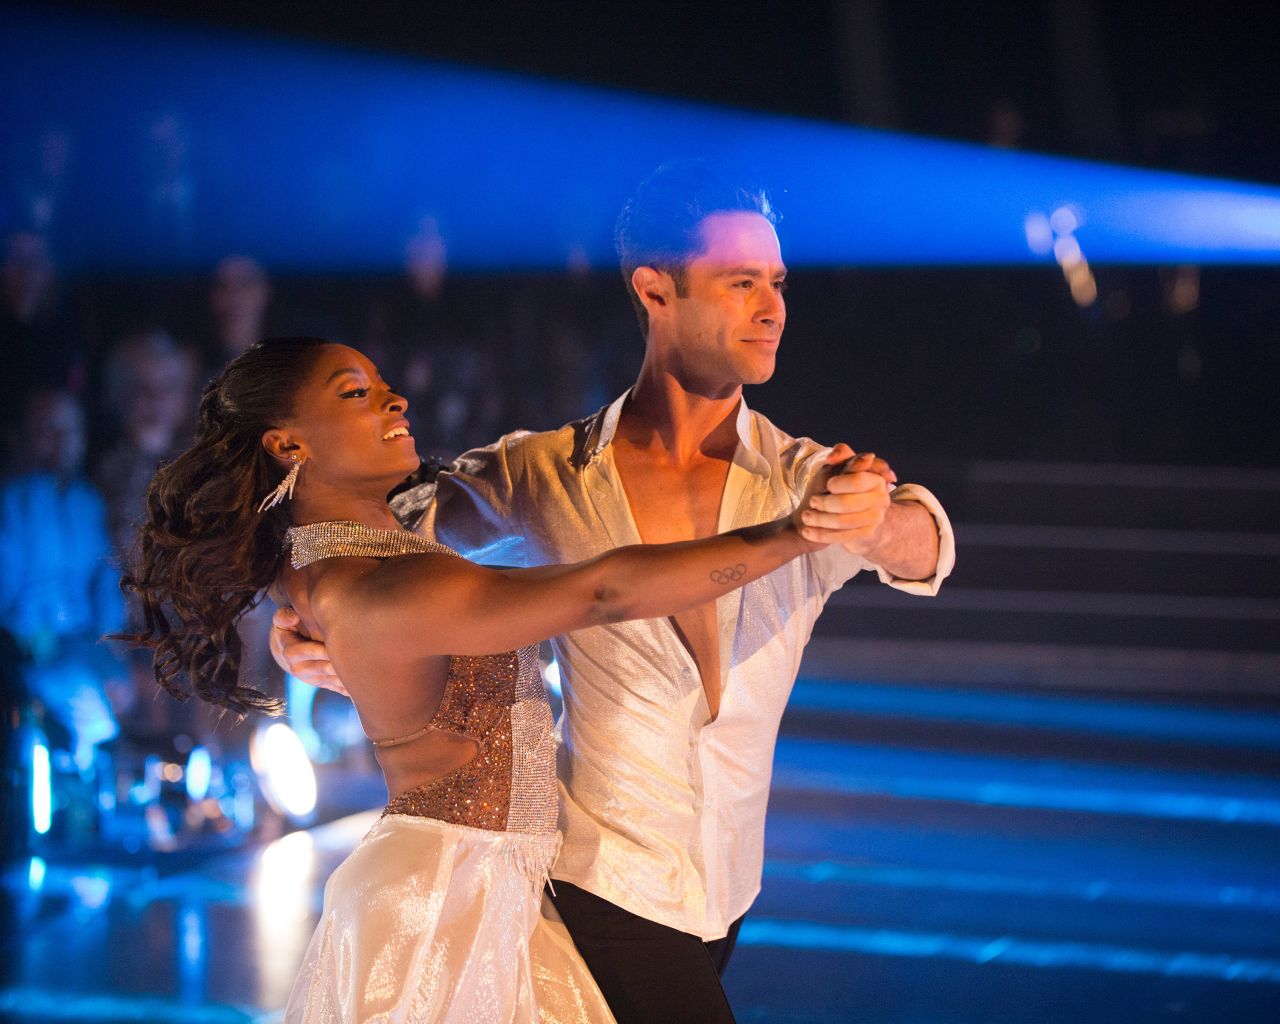 Biles competes in "Dancing with the Stars" with Sasha Farber in 2017.